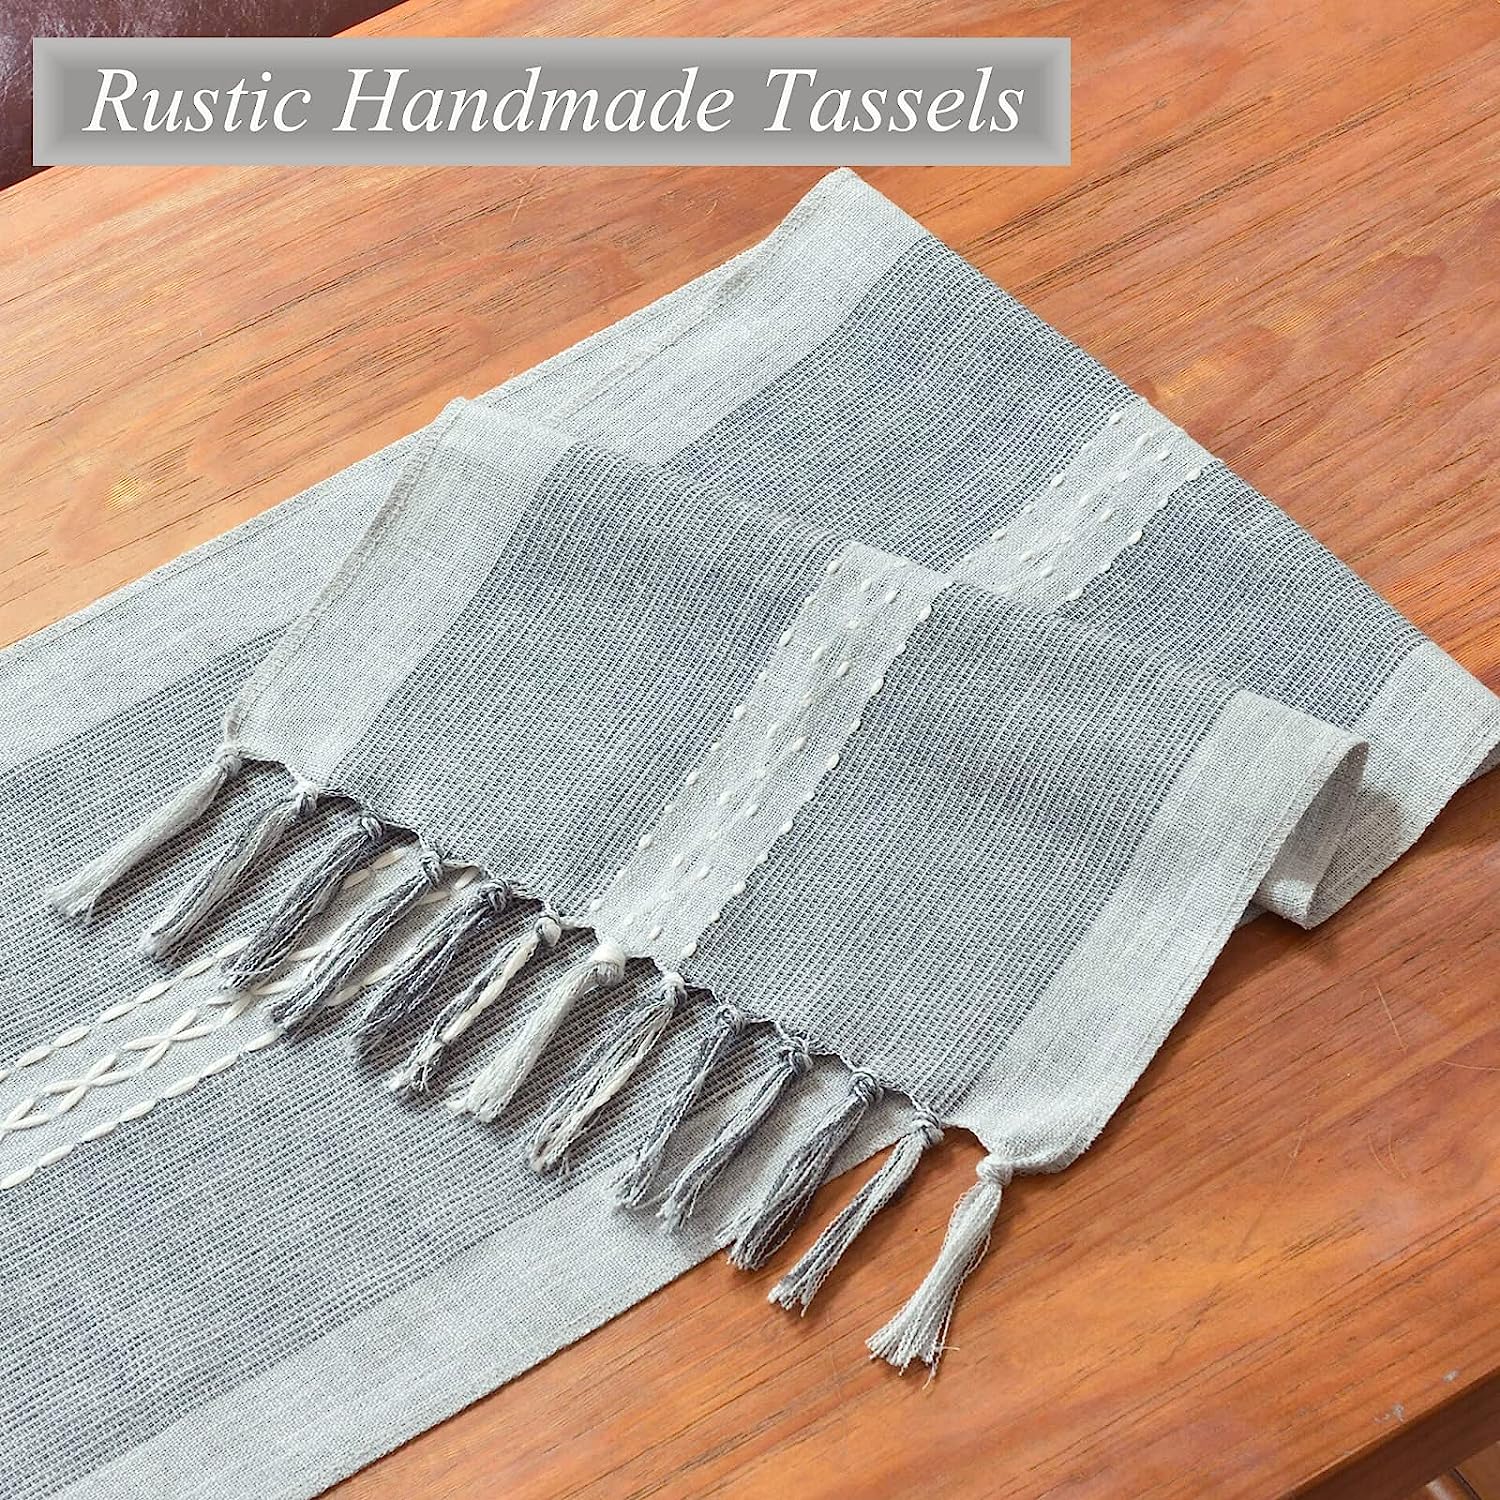 Wracra Embroidery Cotton Linen Table Runner Indoor Outdoor Farmhouse Style Grey Table Runner 180cm with Hand-tassels for Party Dining Kitchen Decorations(Grey, 180cm) 3